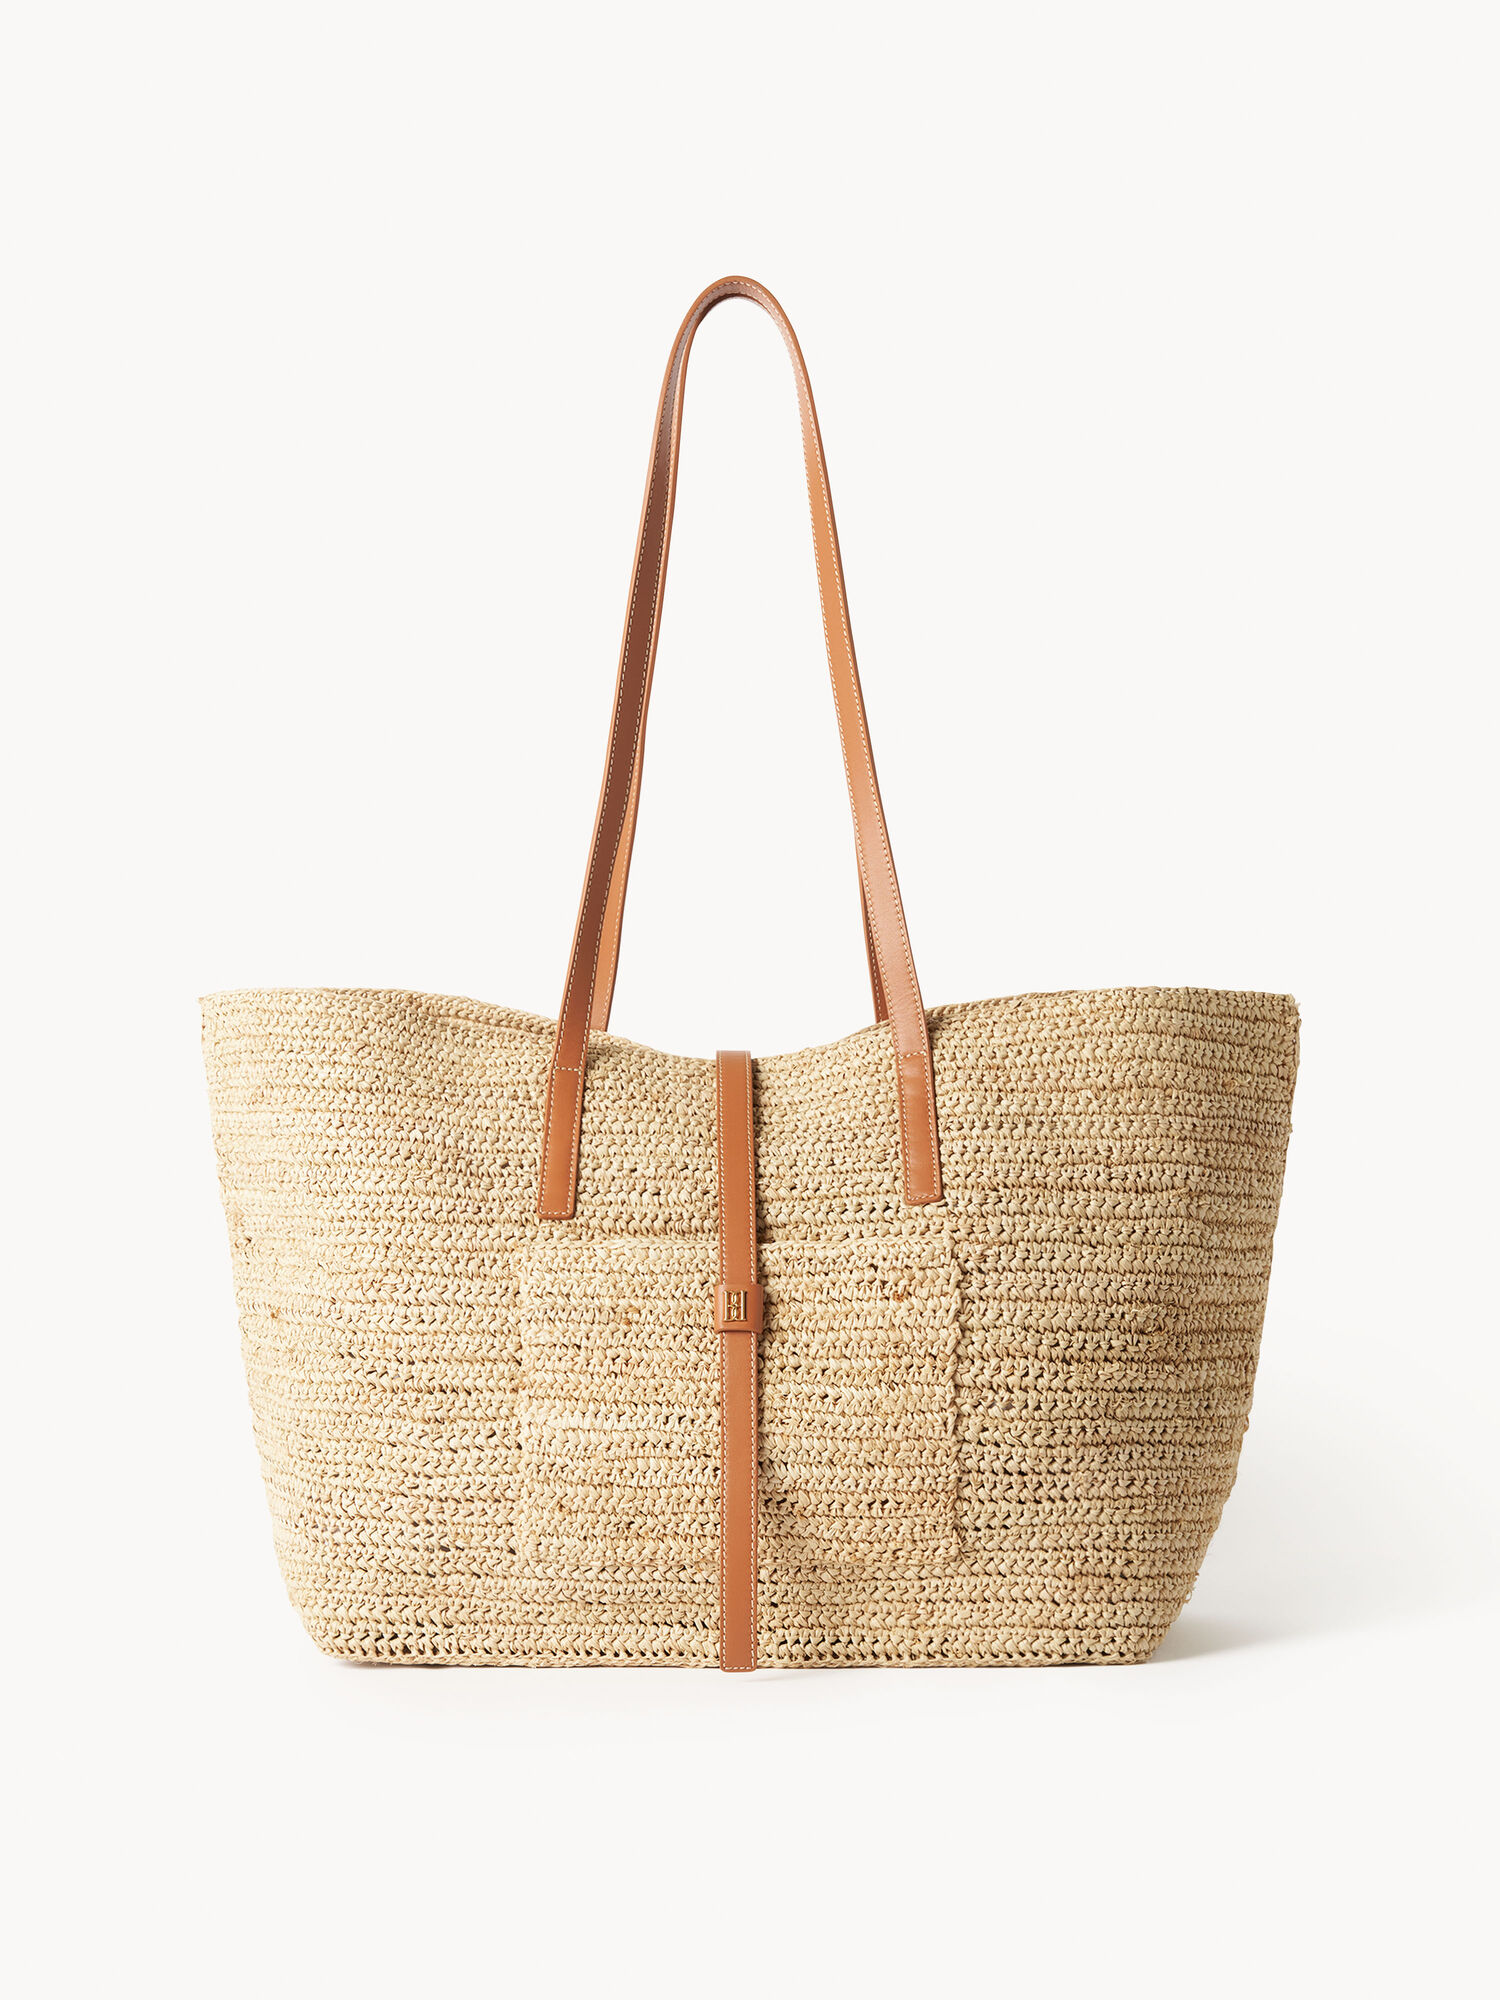 Palla straw tote bag - Buy sfra-bmb-storefront-catalog online | By ...